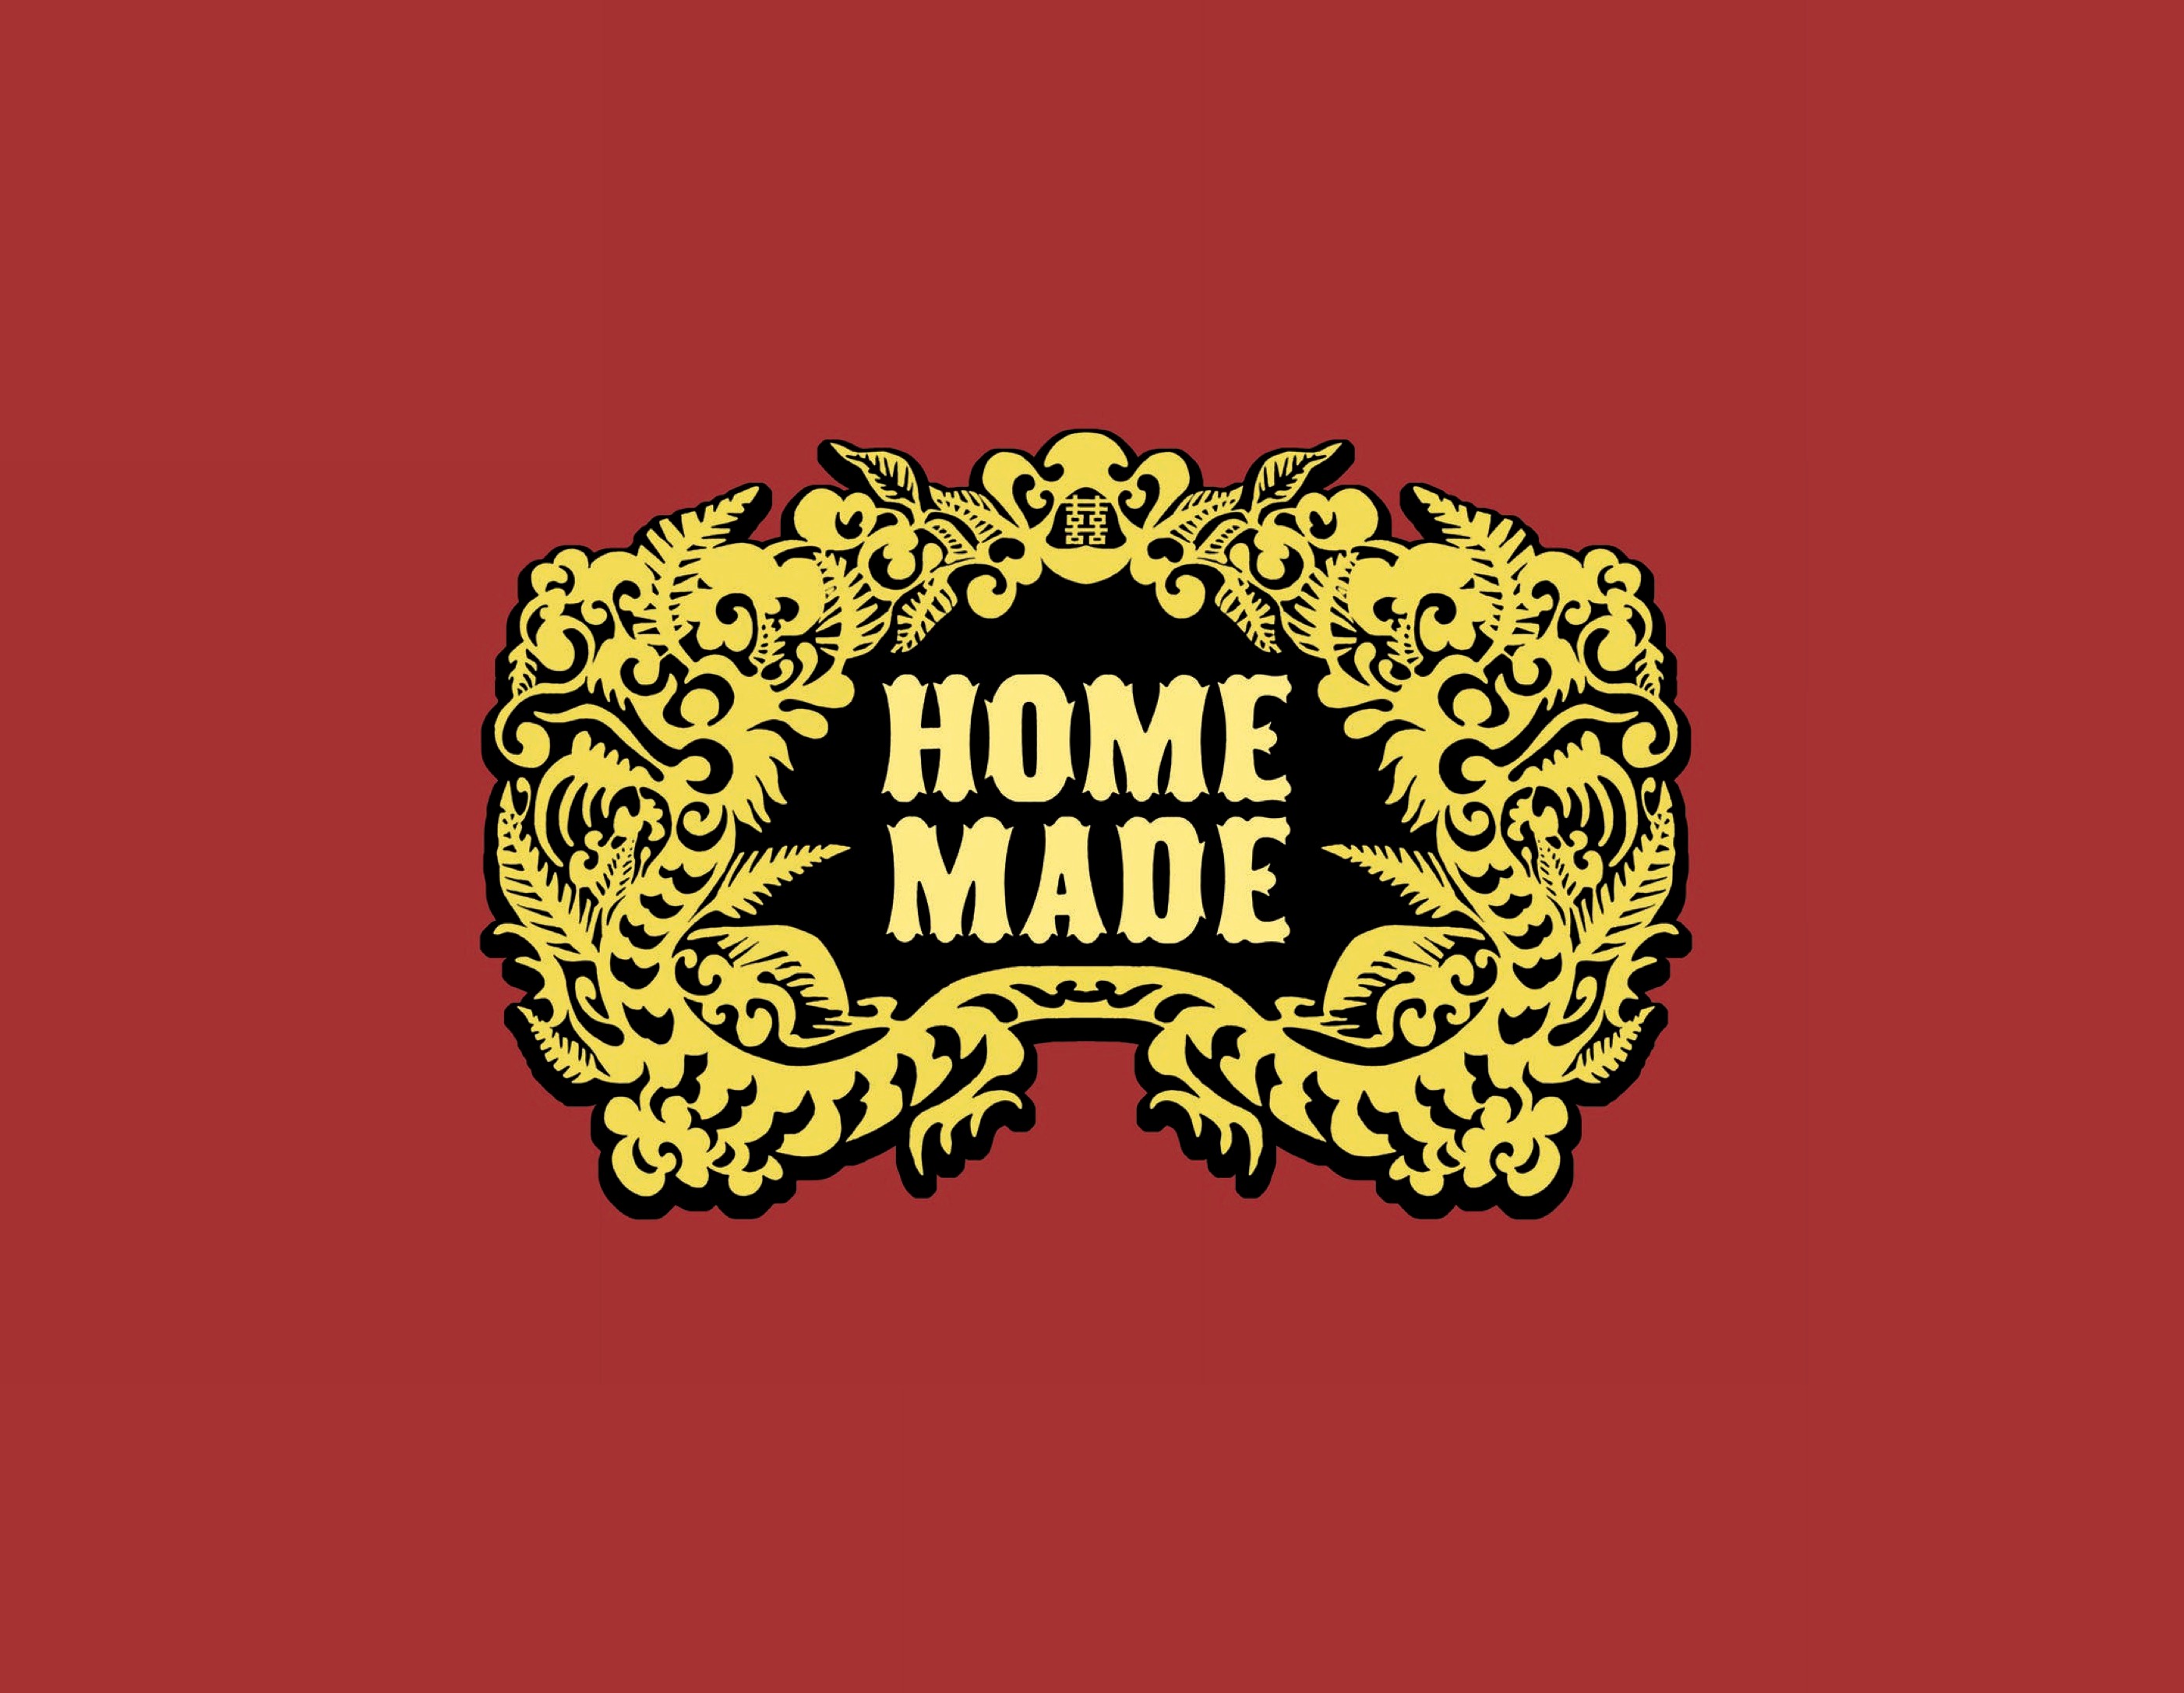 Red cover with the words 'Home Made' in yellow inside an ornate yellow and black Chinese dragon border